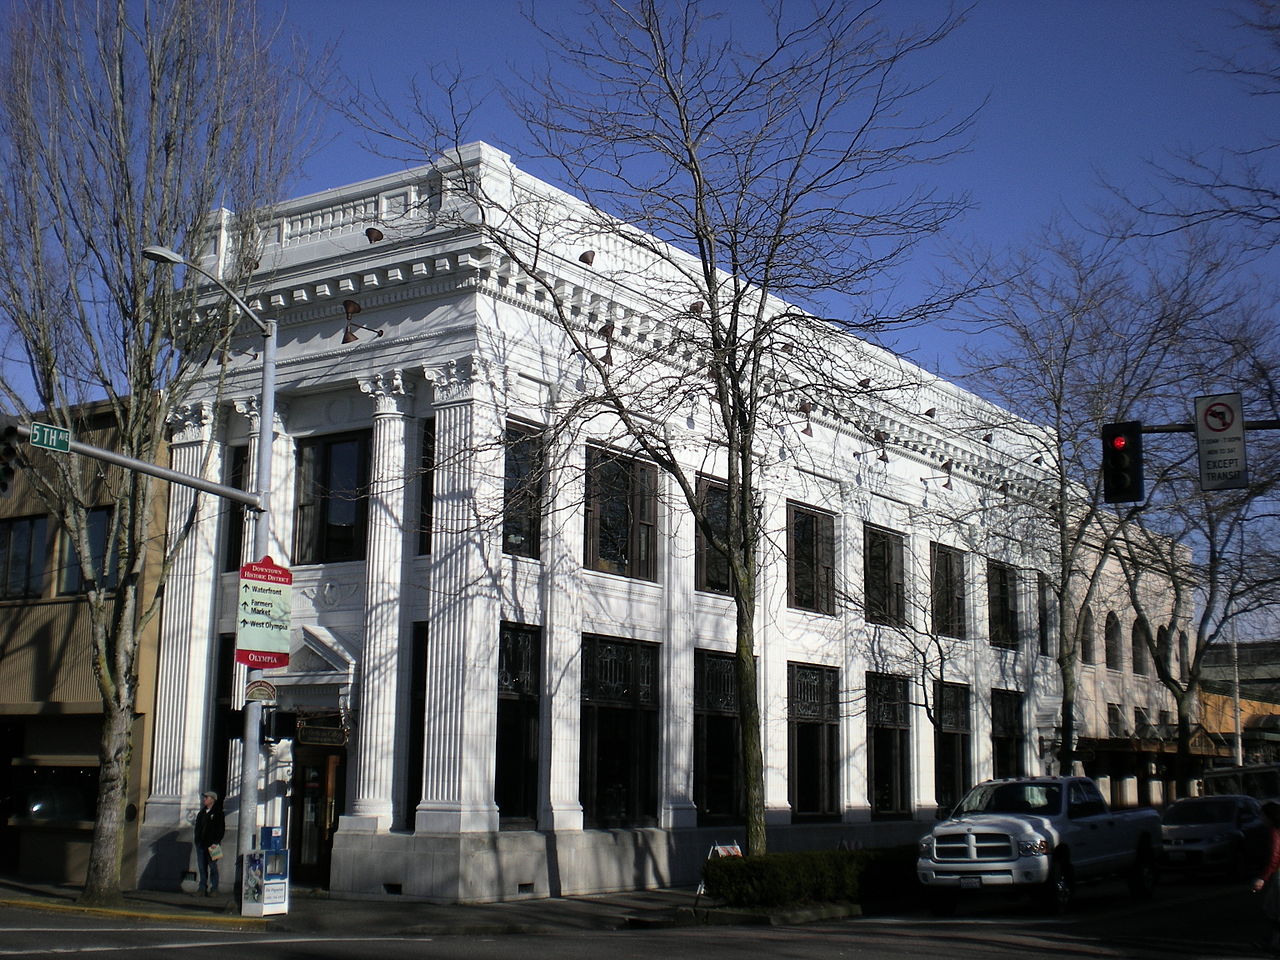 The former Olympia National Bank was constructed in 1915 and is an excellent example of Neoclassical architecture.